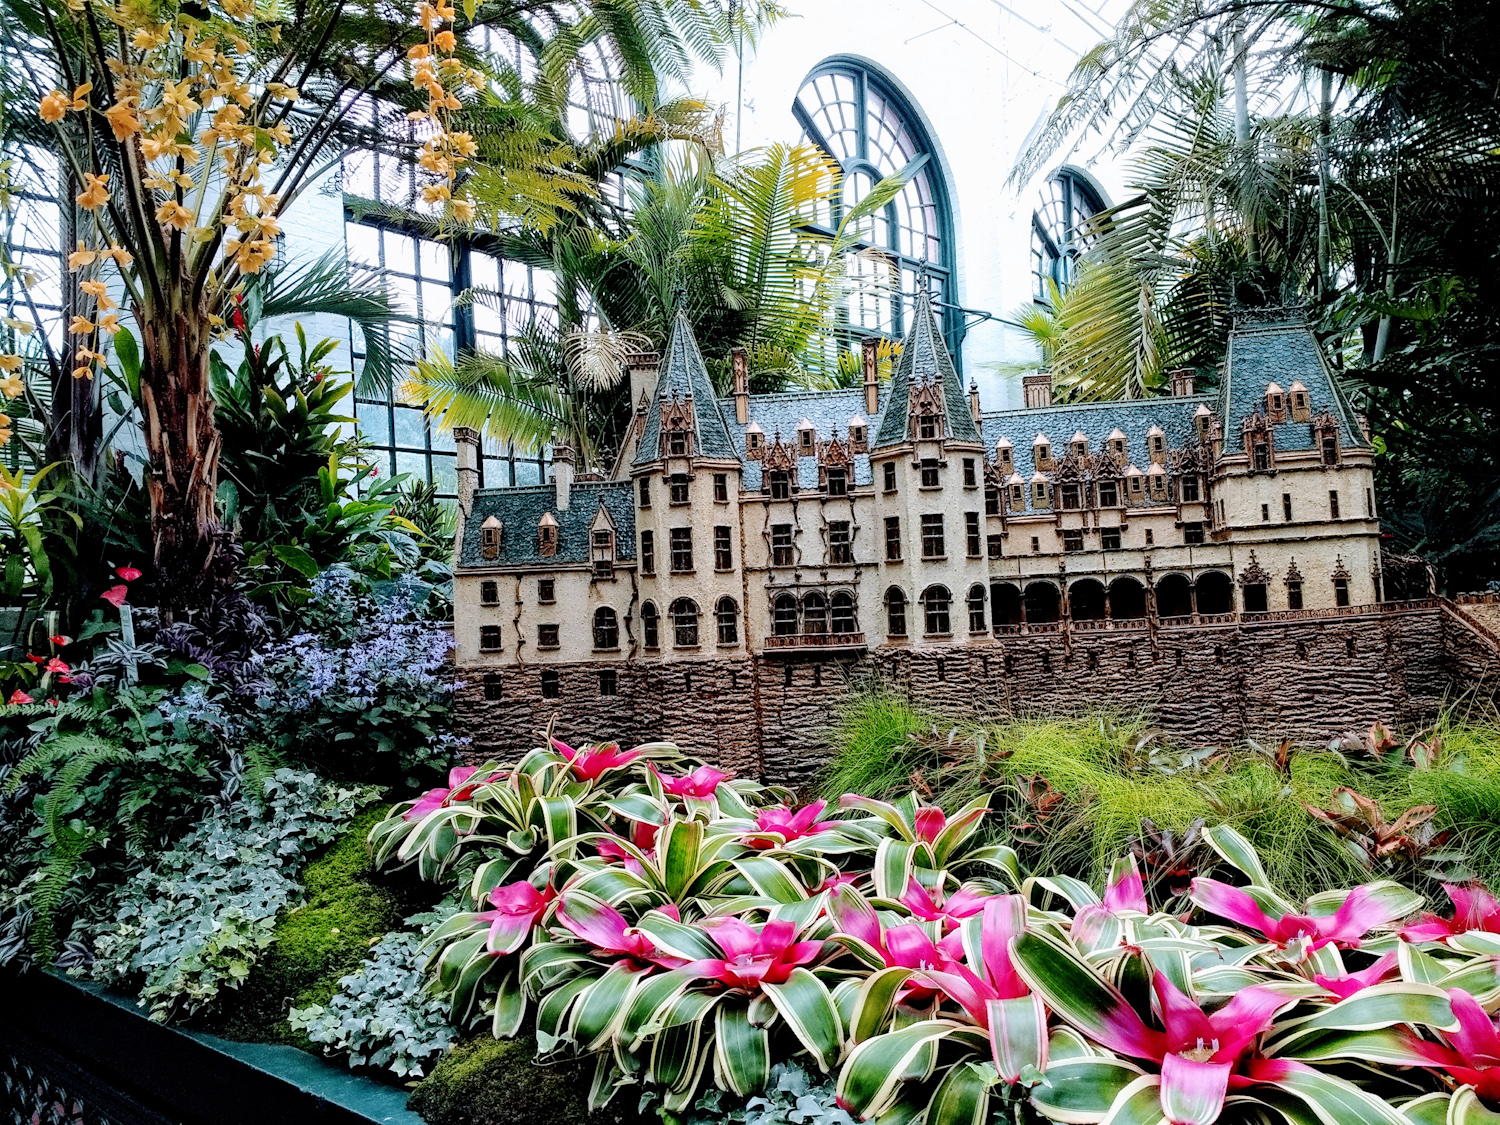 Miniature of Biltmore House inside Conservatory